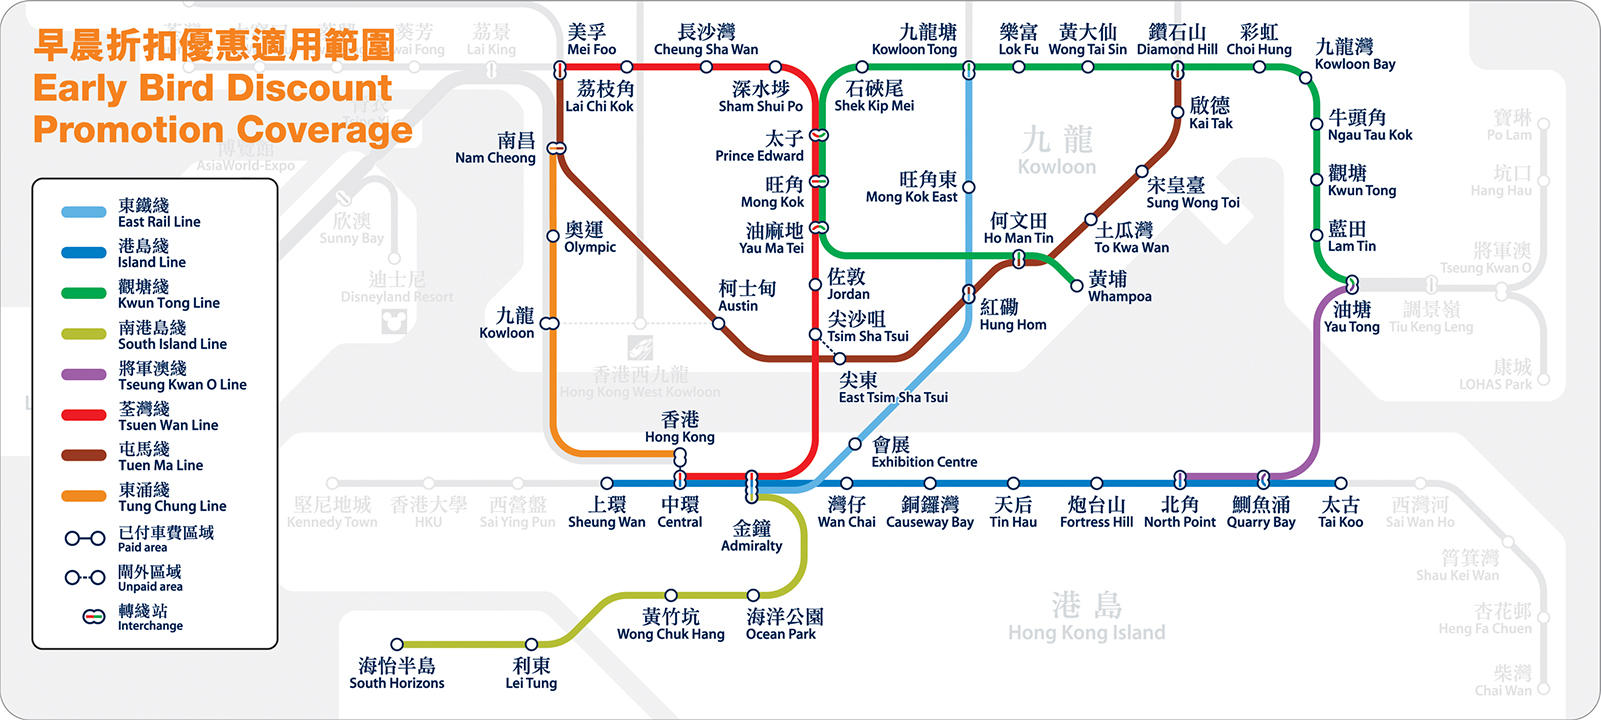 The designated stations are:<br/>
								East Rail Line: Stations between Hung Hom and Kowloon Tong<br/>
								Island Line: Stations between Sheung Wan and Tai Koo<br/>
								Kwun Tong Line: Stations between Whampoa and Yau Tong<br>
								South Island Line : Stations between Admiralty and South Horizons<br/>
								Tsuen Wan Line: Stations between Central and Mei Foo<br/>
								Tung Chung Line: Stations between Hong Kong and Nam Cheong<br/>
								Tuen Ma Line: stations between Diamond Hill and Tsuen Wan West<br/>
								Tseung Kwan O Line: Stations between North Point and Yau Tong